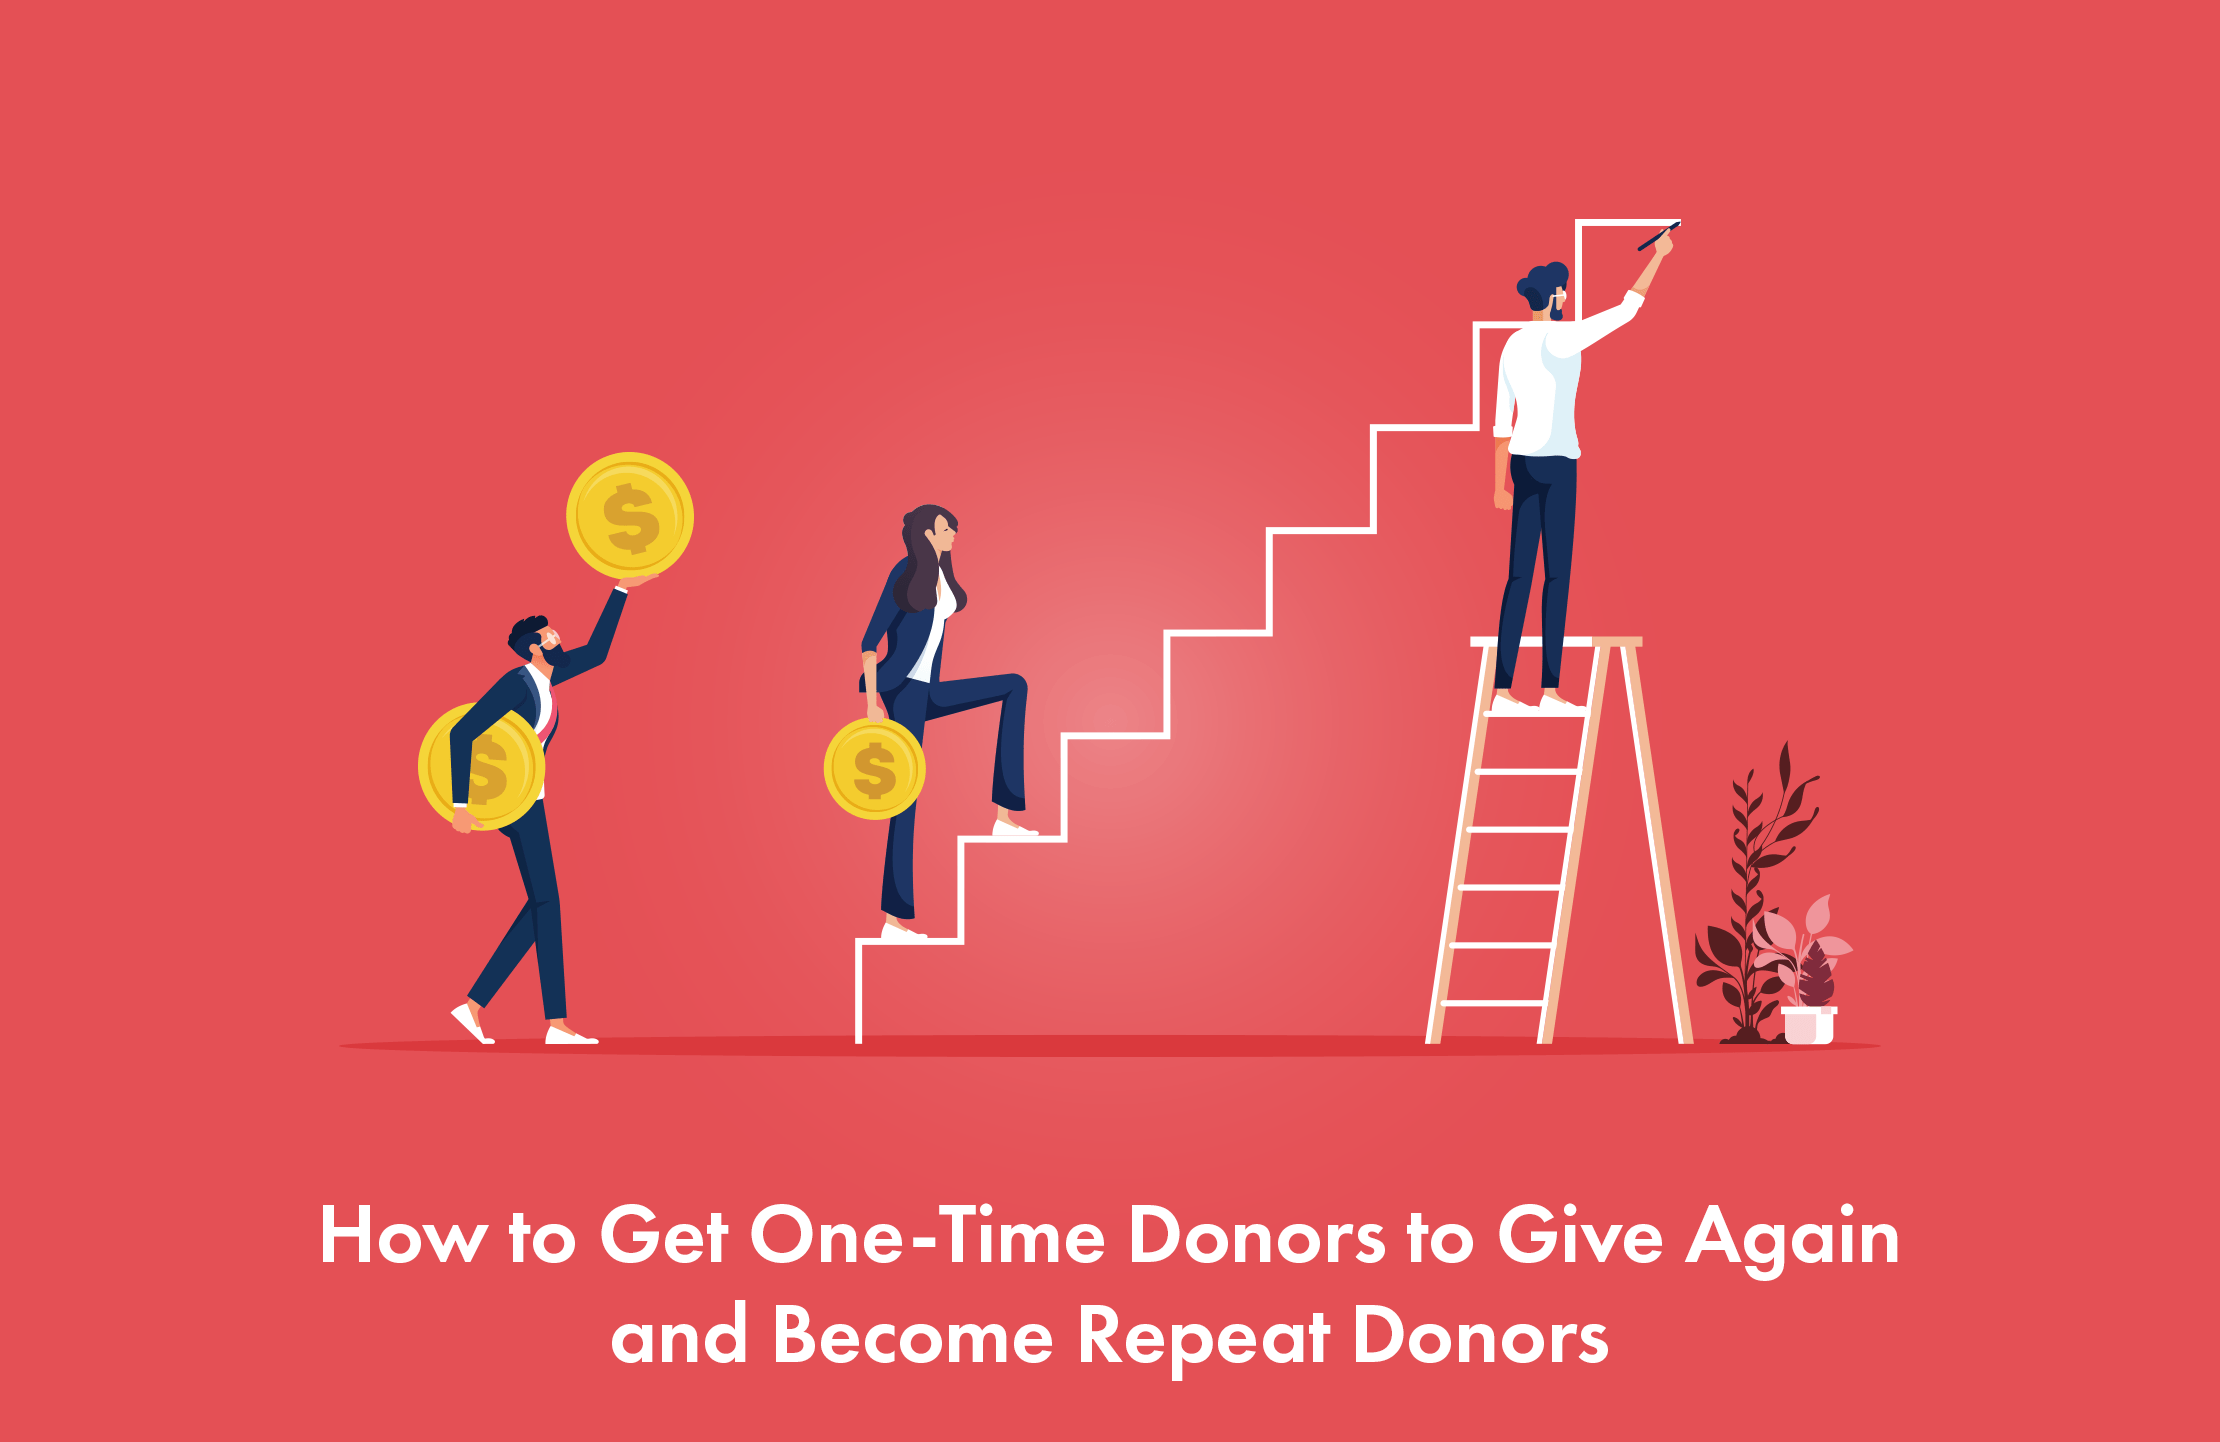 How to get one-time donors to give again and turn into repeat donors